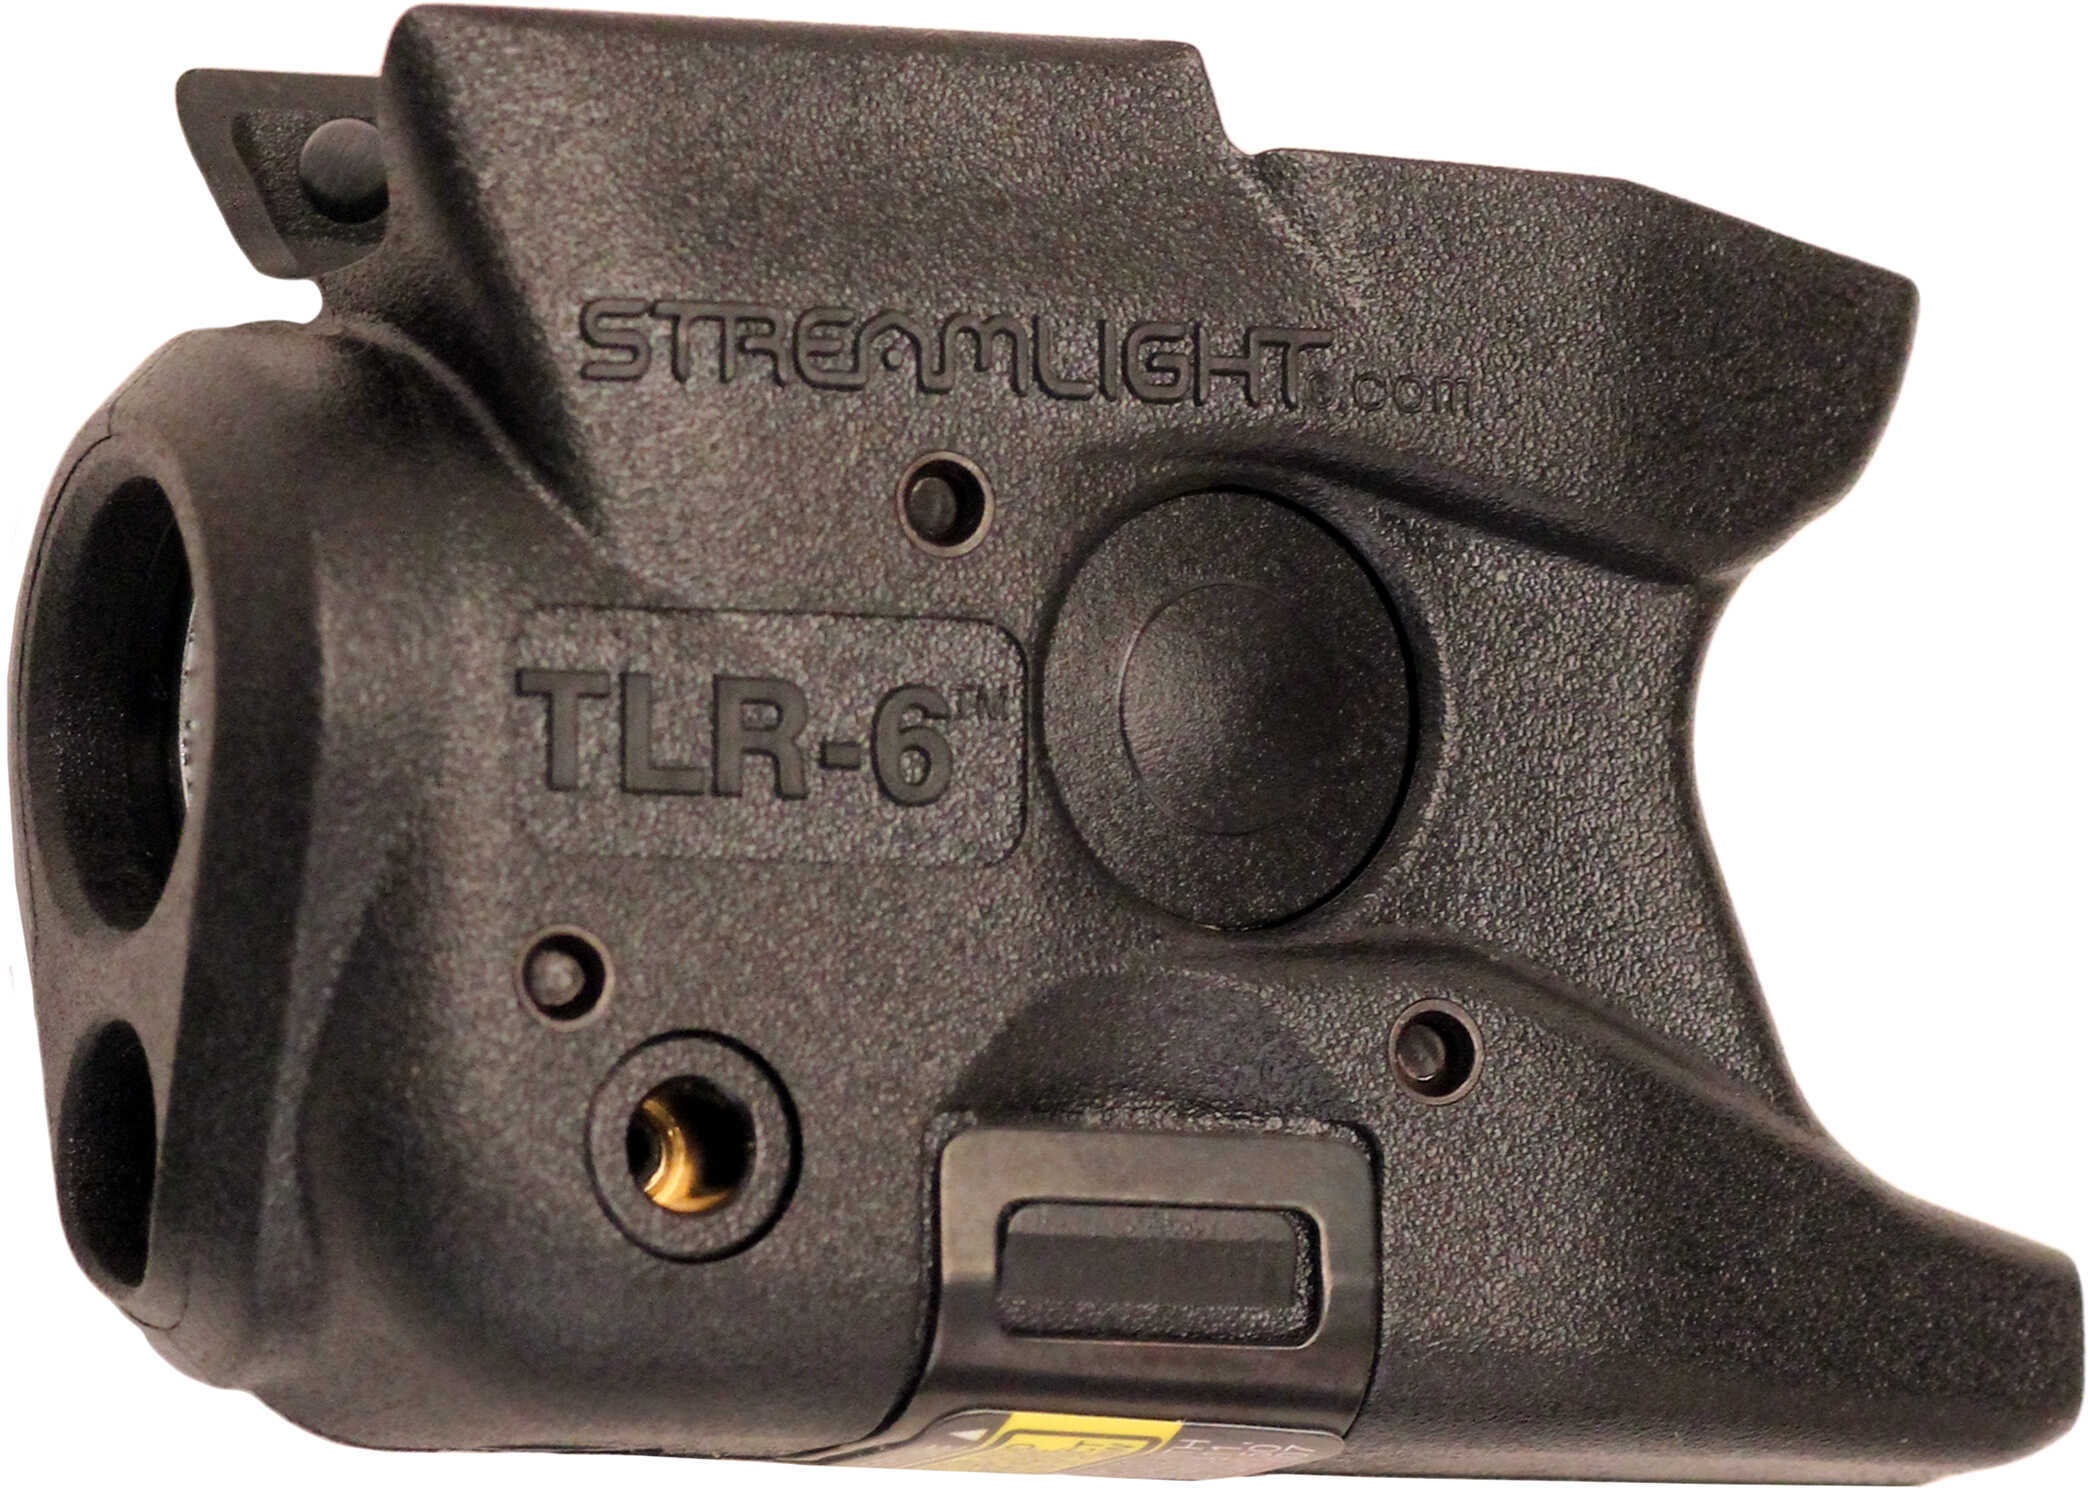 StreamLight TLR-6 Subcompact Tactical Light With I-img-1